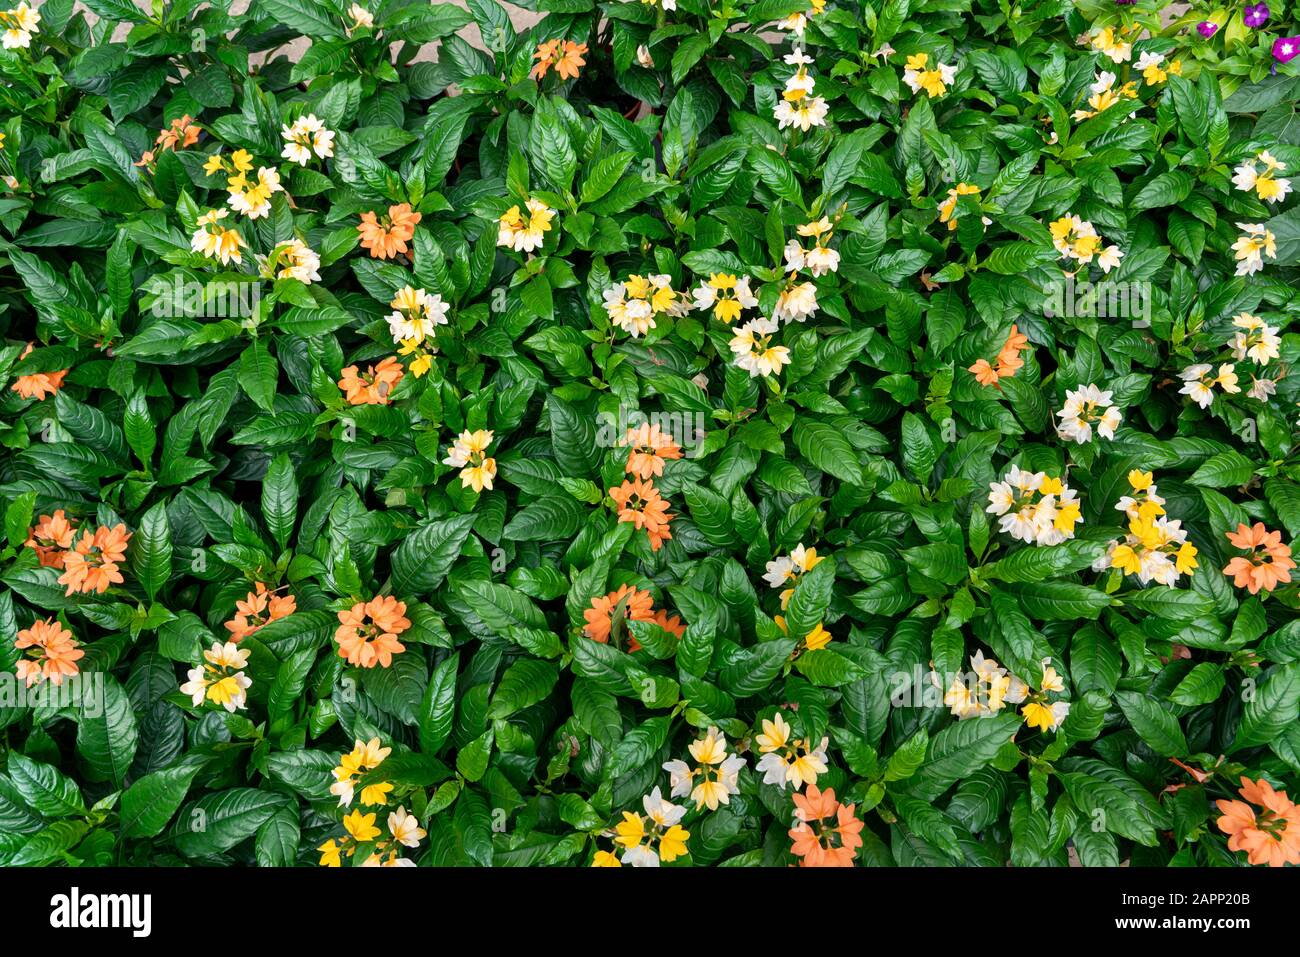 beautiful flowerbed of orange, yellow and white petals Crossandra flowers , a genus of plants in the family Acanthaceae. Stock Photo